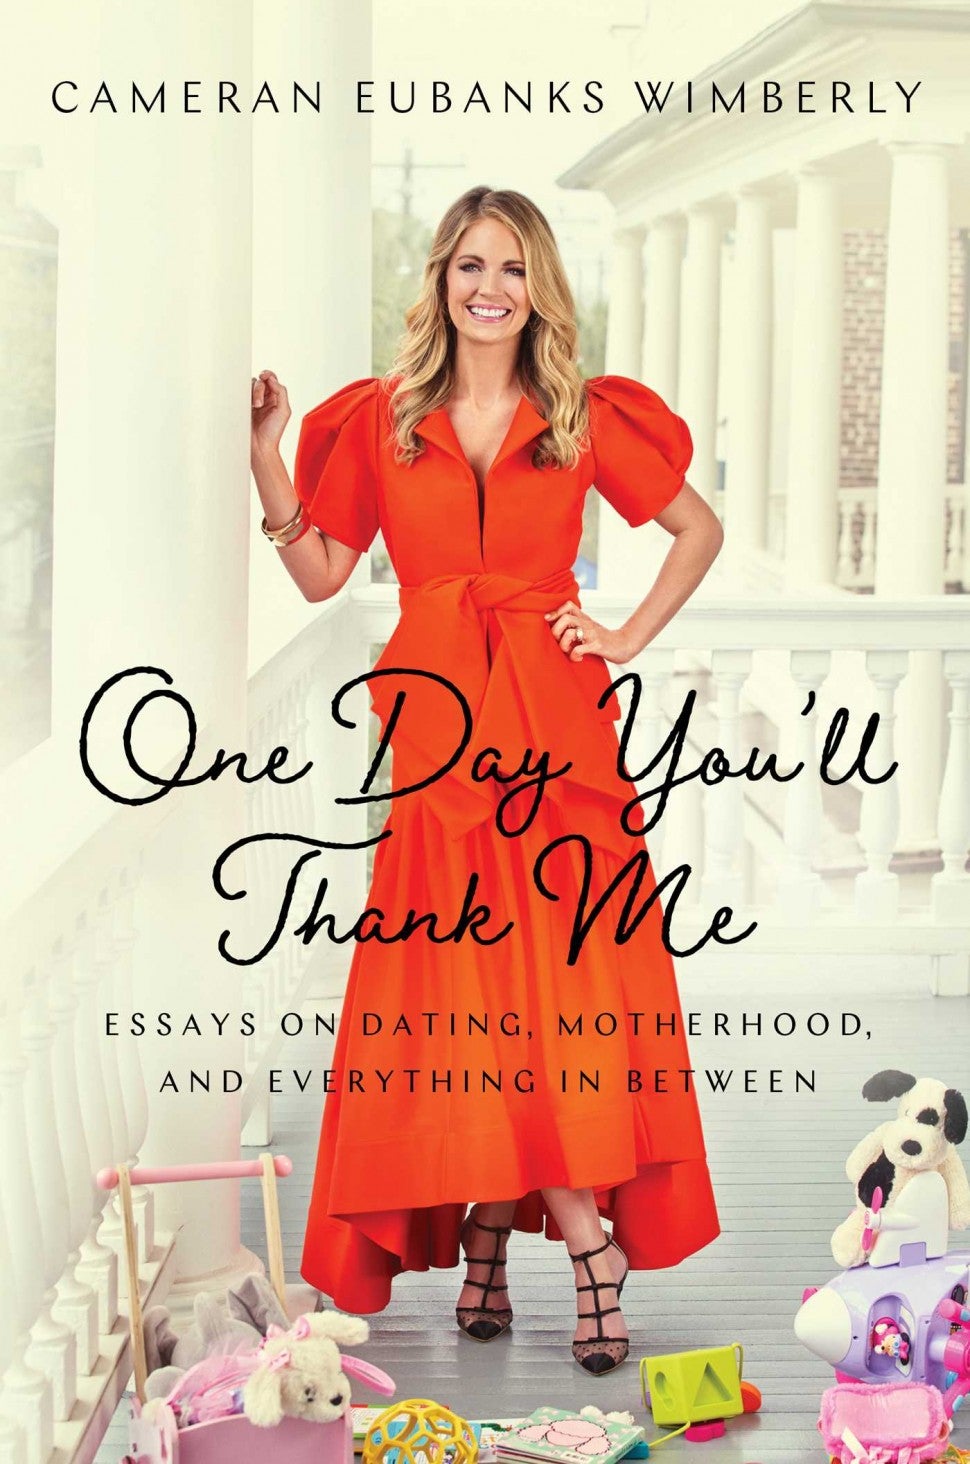 The cover of Cameran Eubanks' collection of essays, 'One Day You'll Thank Me.'